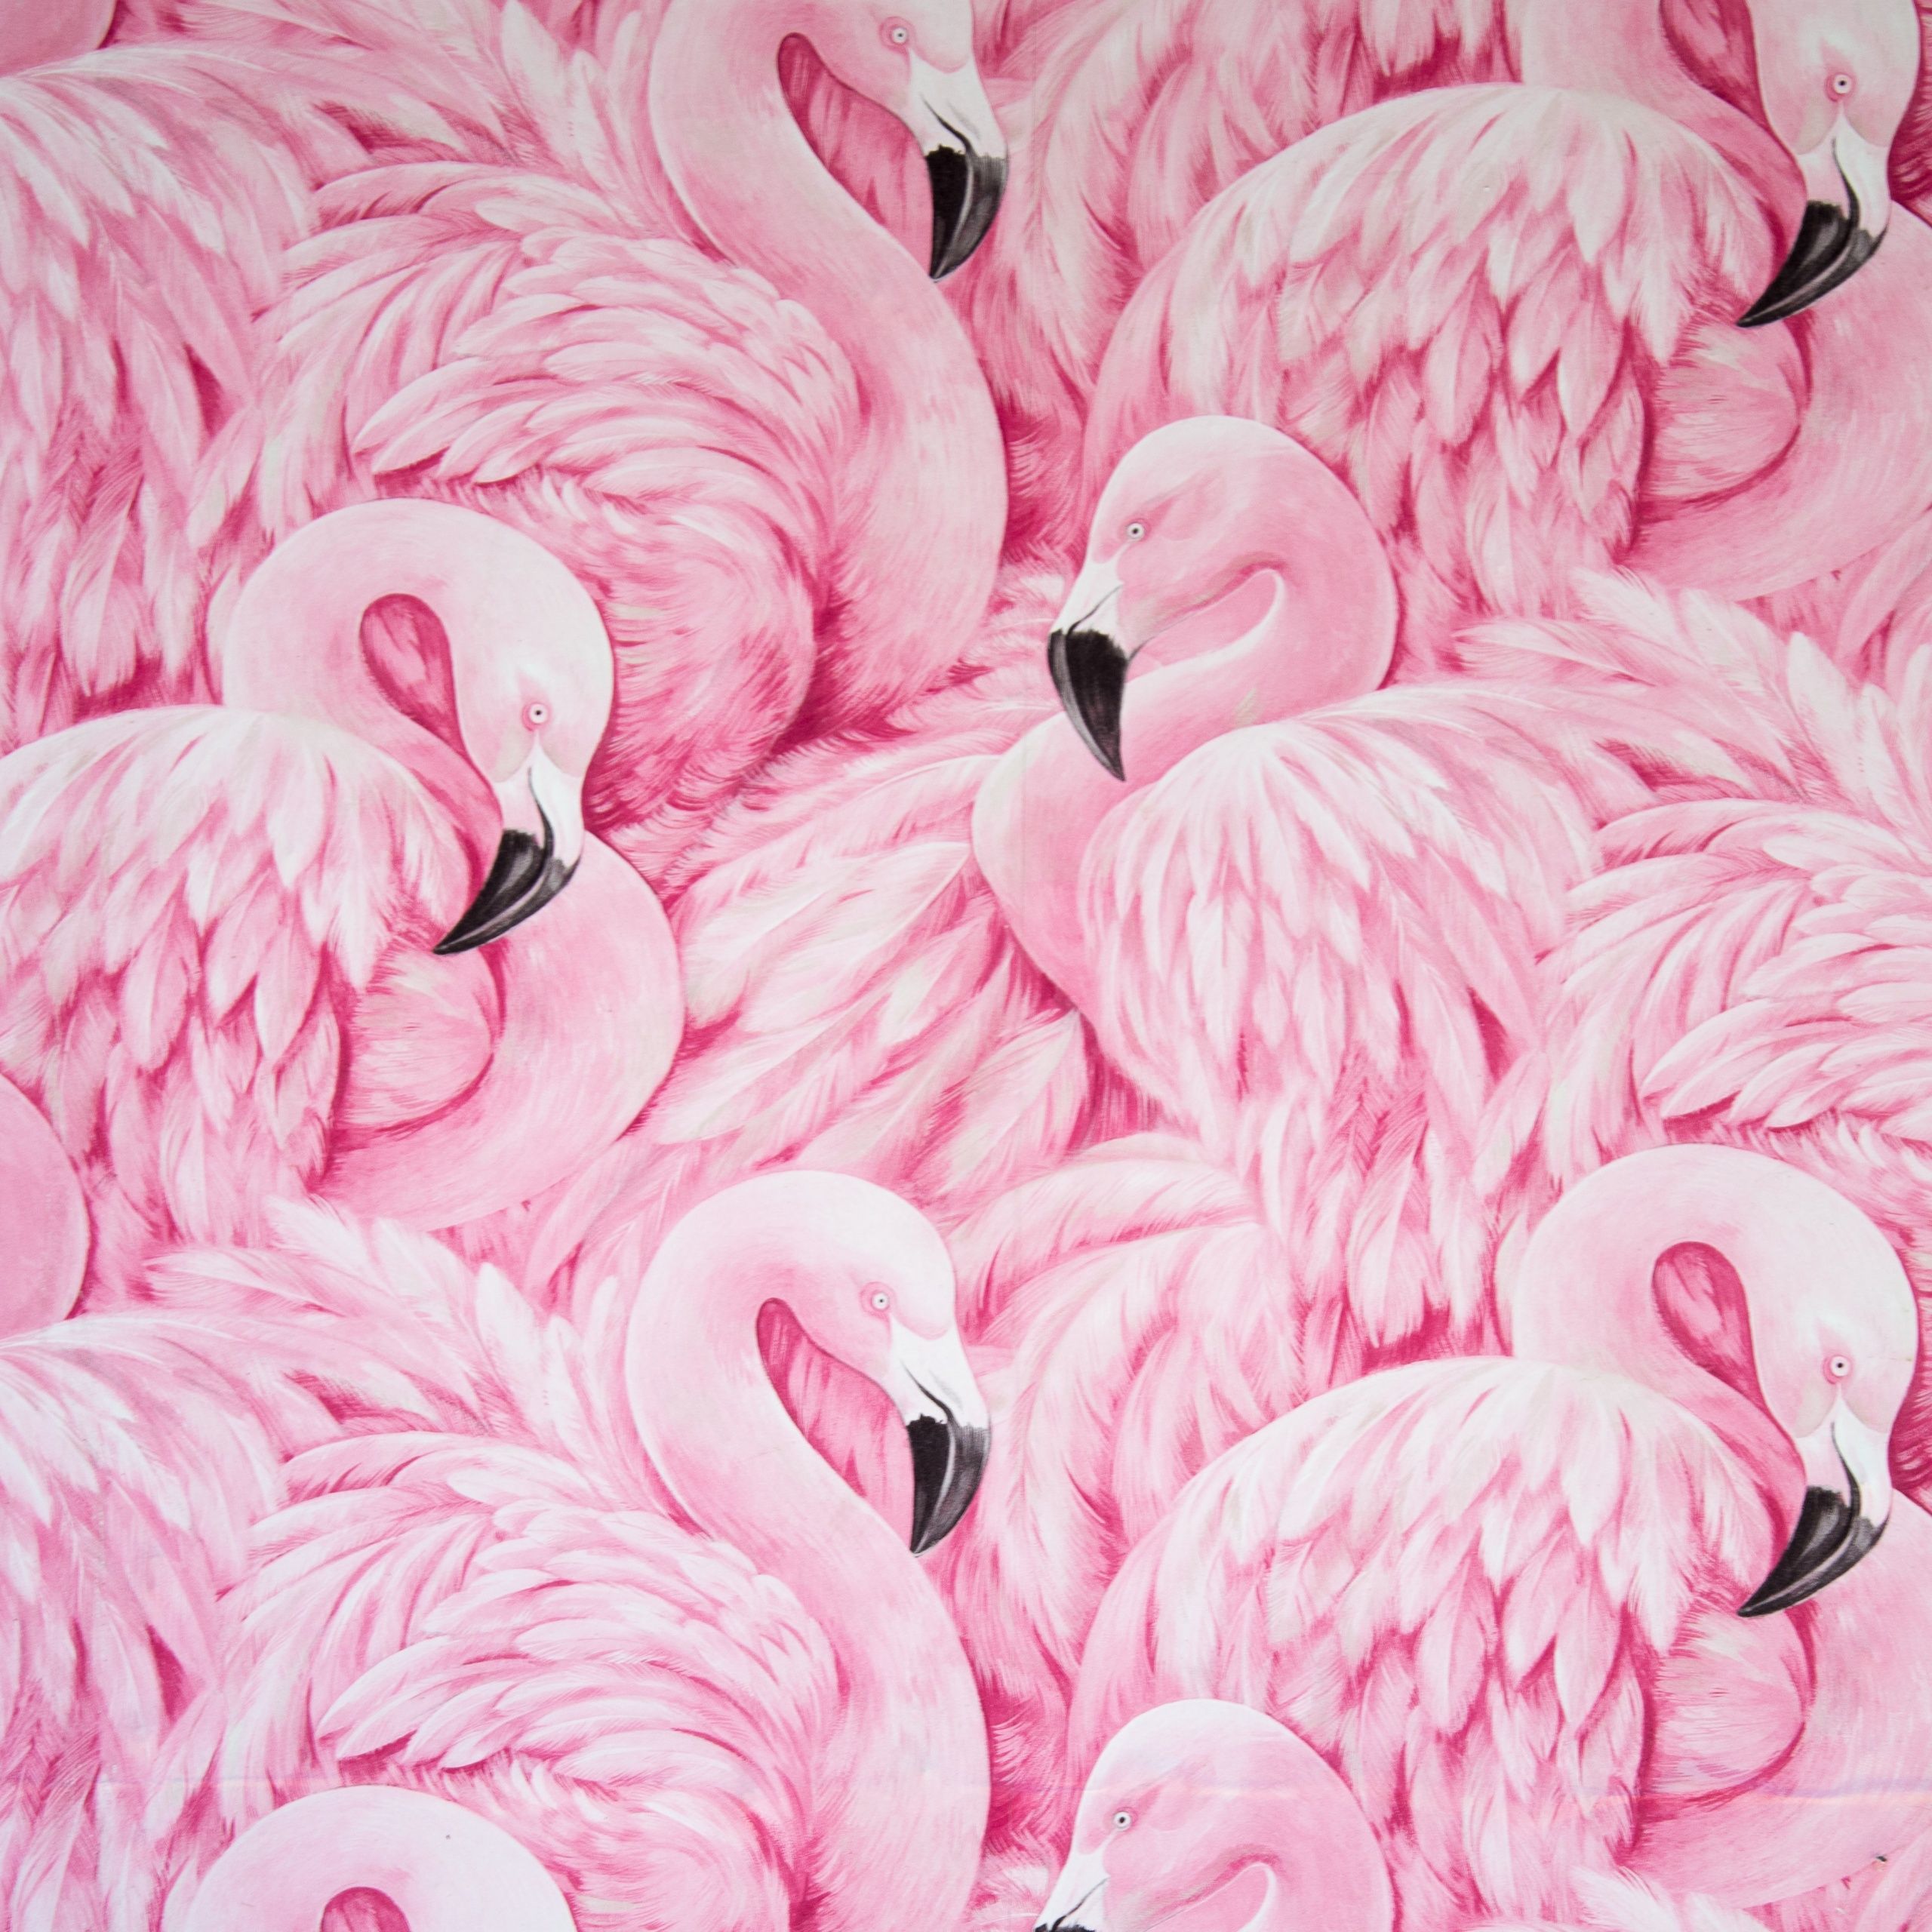 A large flock of pink flamingos are standing together. - Feathers, flamingo